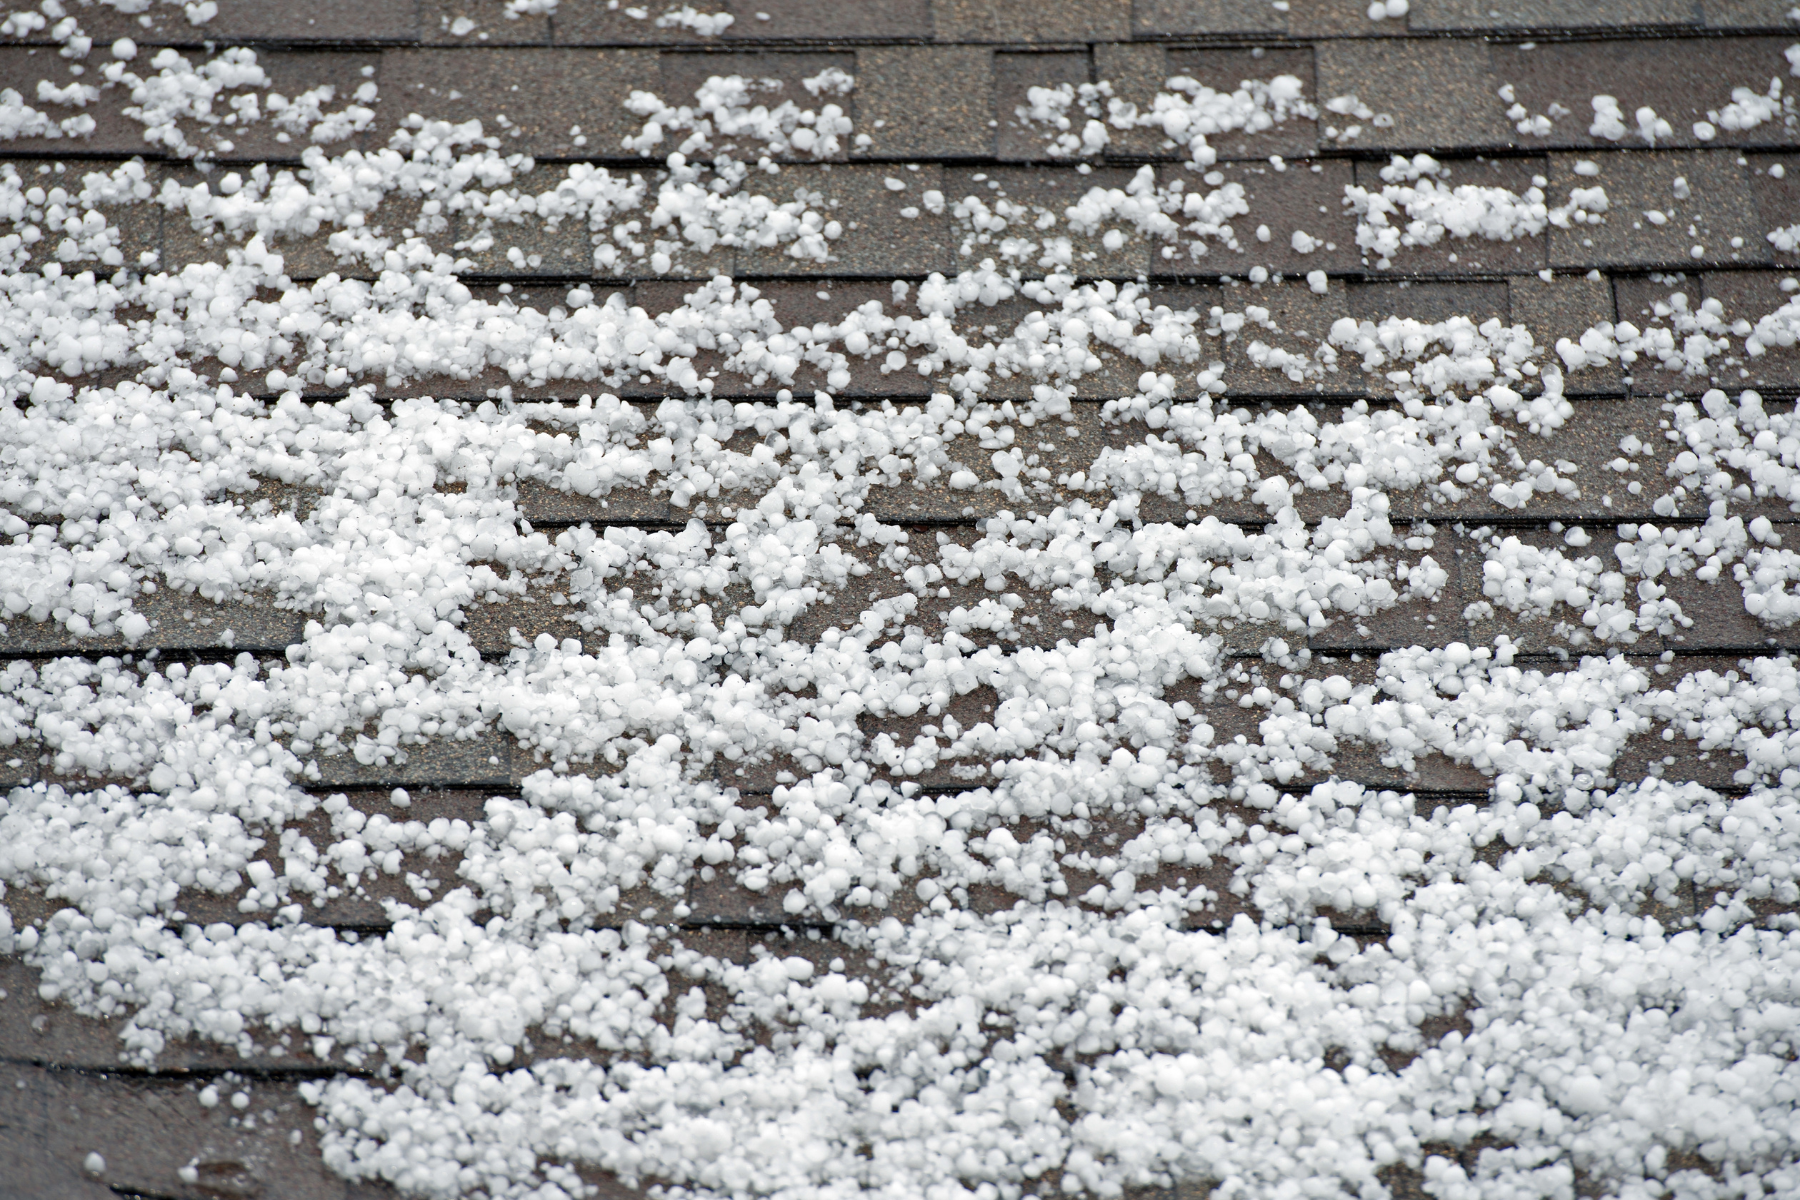 How Hail Storms Affect Your Roof in Colorado